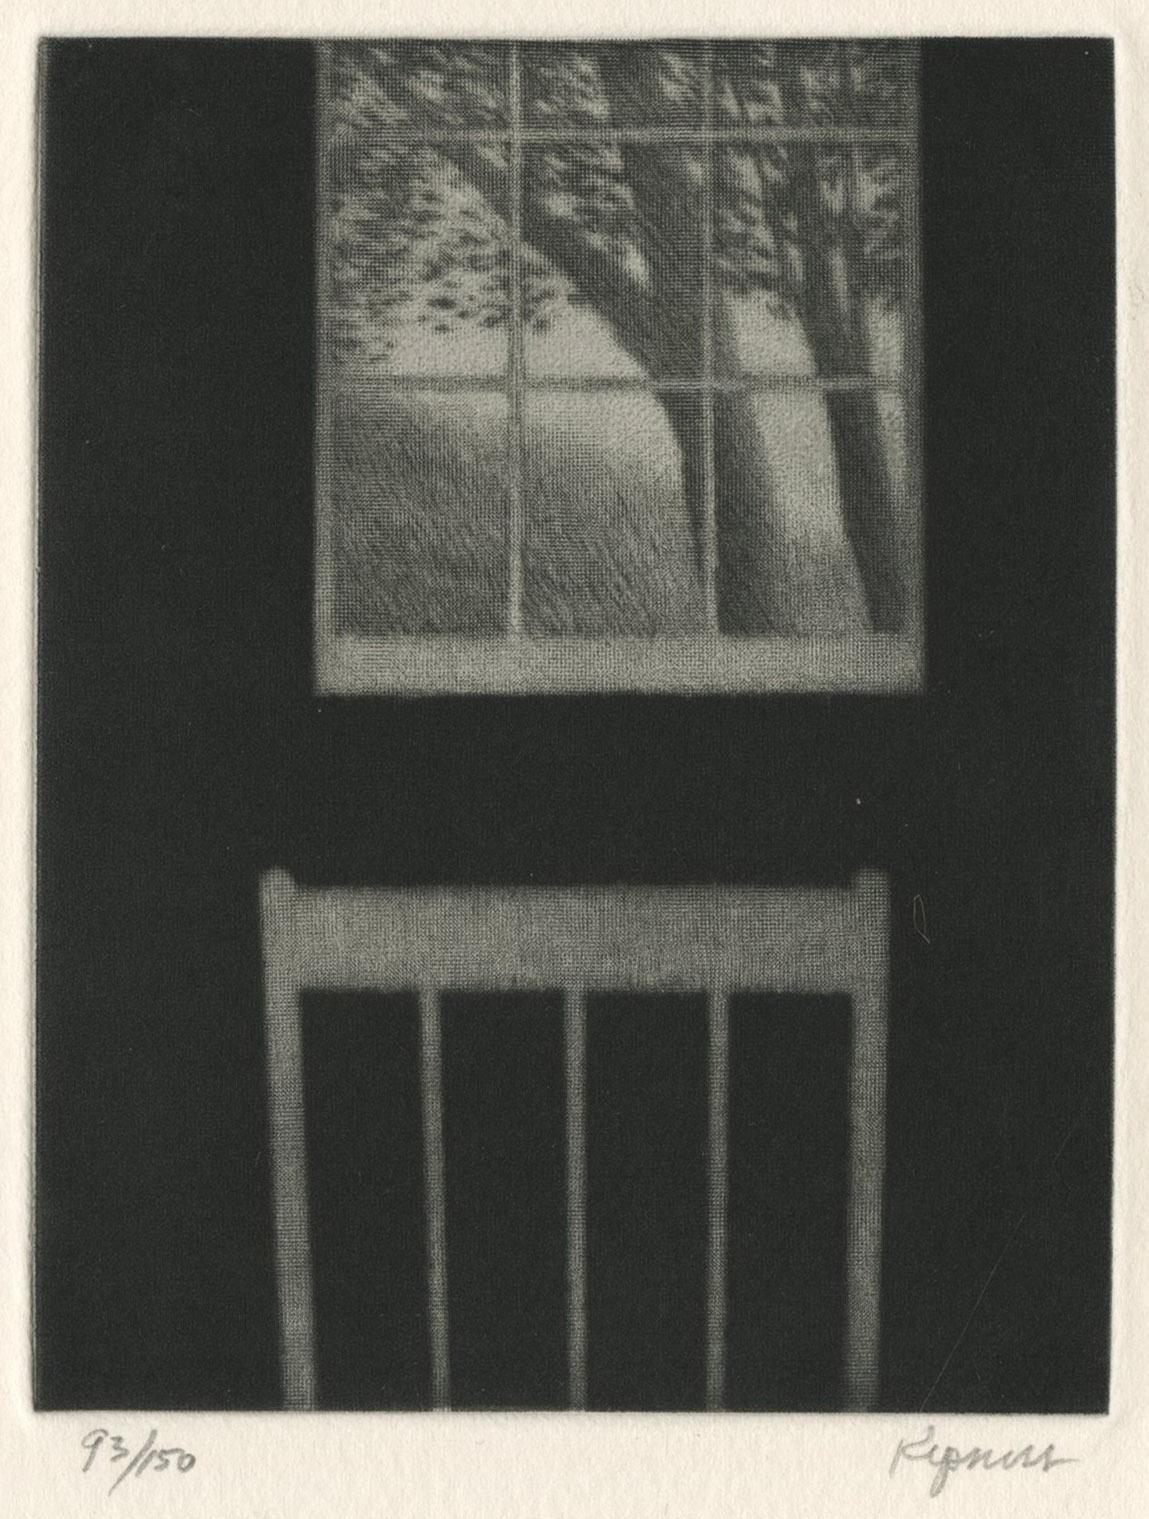 Landscape with Window and Chair